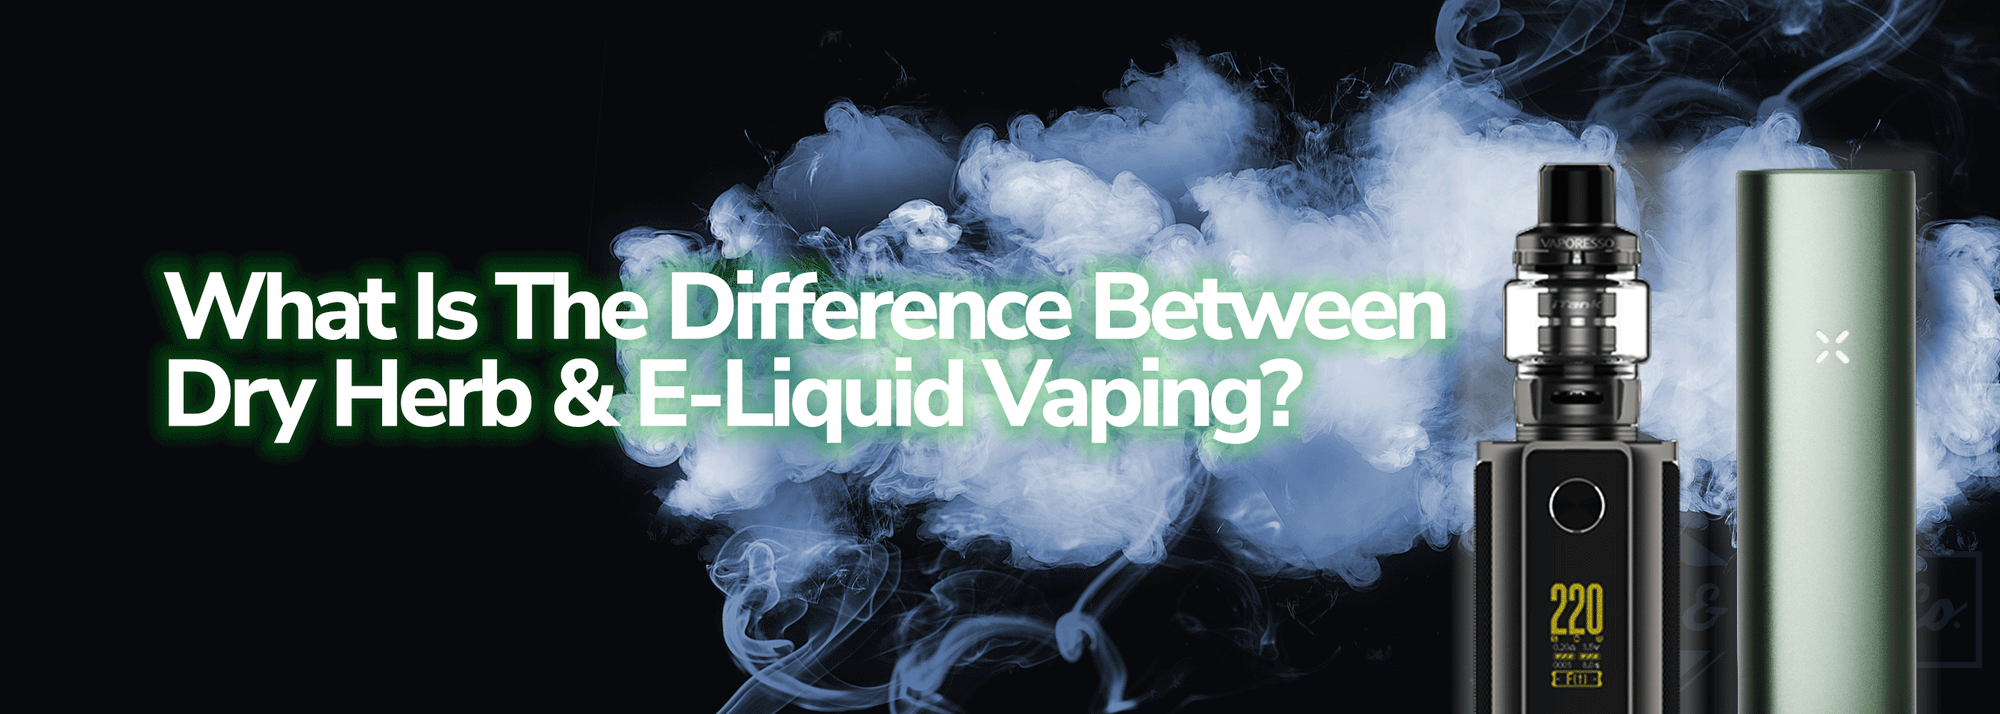 What Is The Difference Between Dry Herb & E-Liquid Vaping?  - Wick and Wire Co, Melbourne Australia